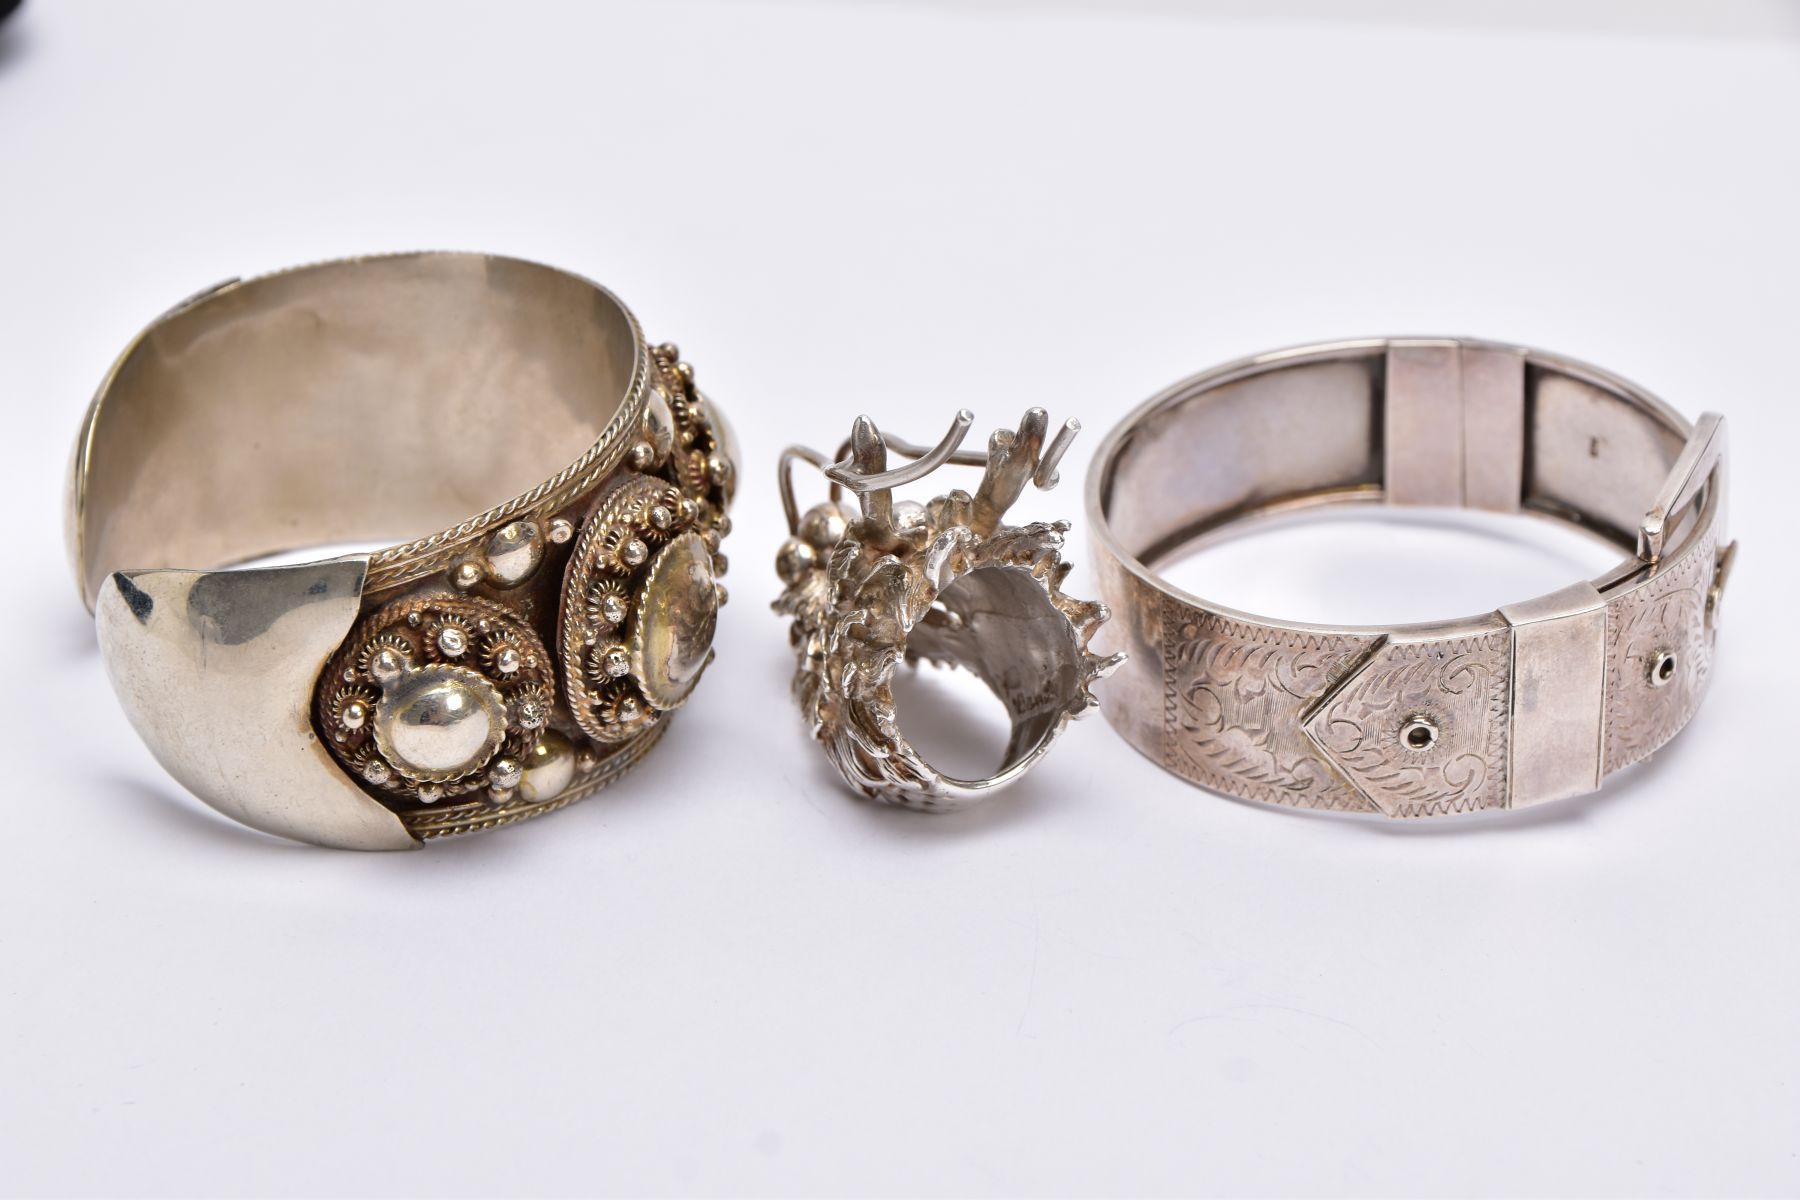 A WHITE METAL BANGLE, CUFF BANGLE AND A RING, the hinged bangle of a belt and buckle design, foliate - Image 3 of 5